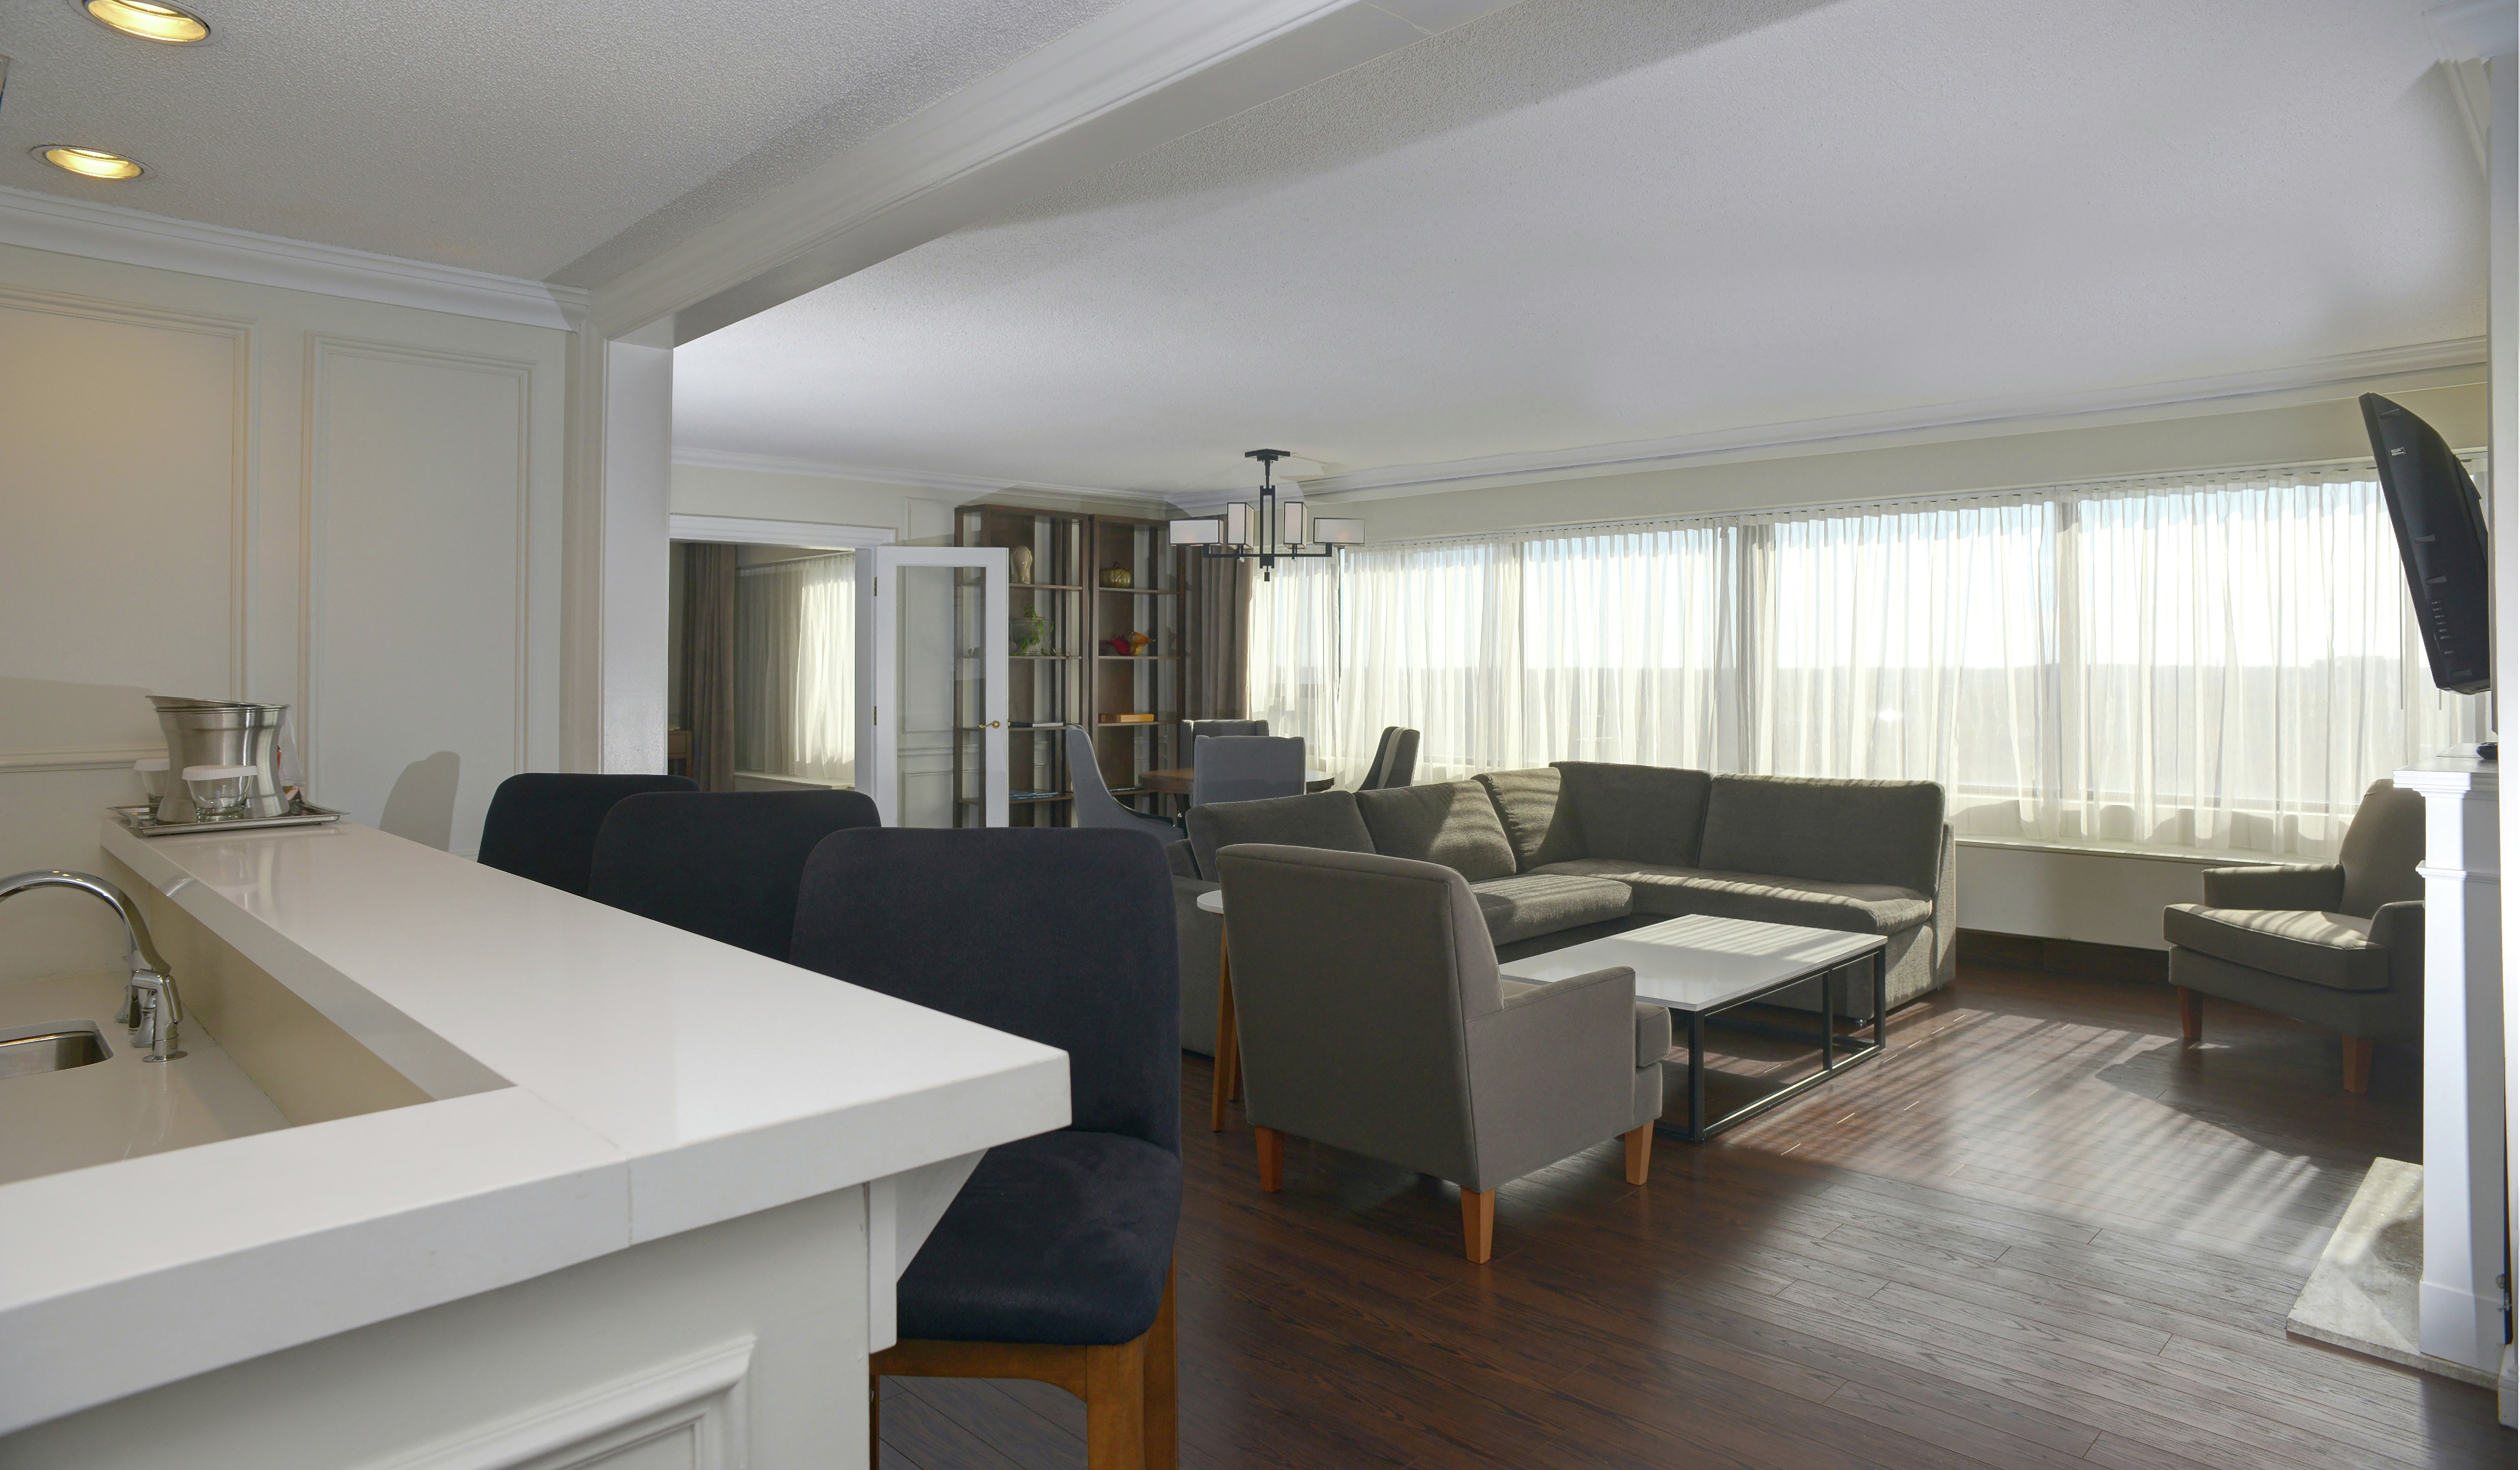 Prime Minister Suite Living Area with Sofa, Chairs, and Full Windows In Background